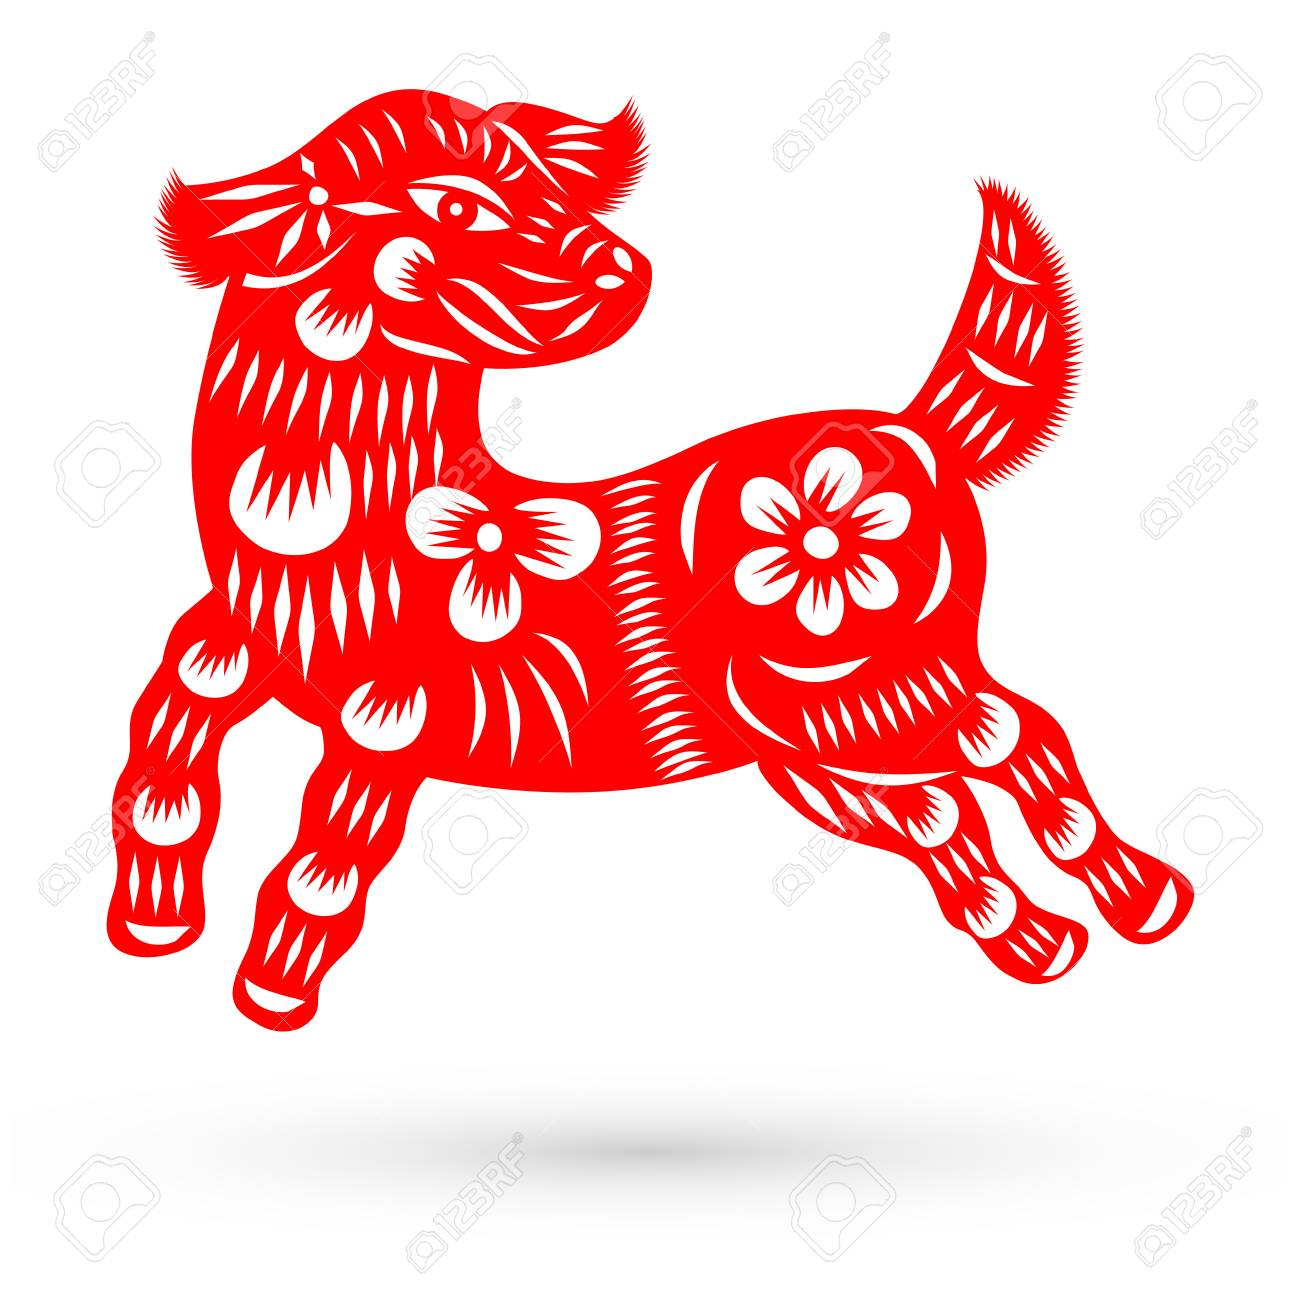 Paper Cut Chinese Zodiac Sign, Year Of Dog, Vector